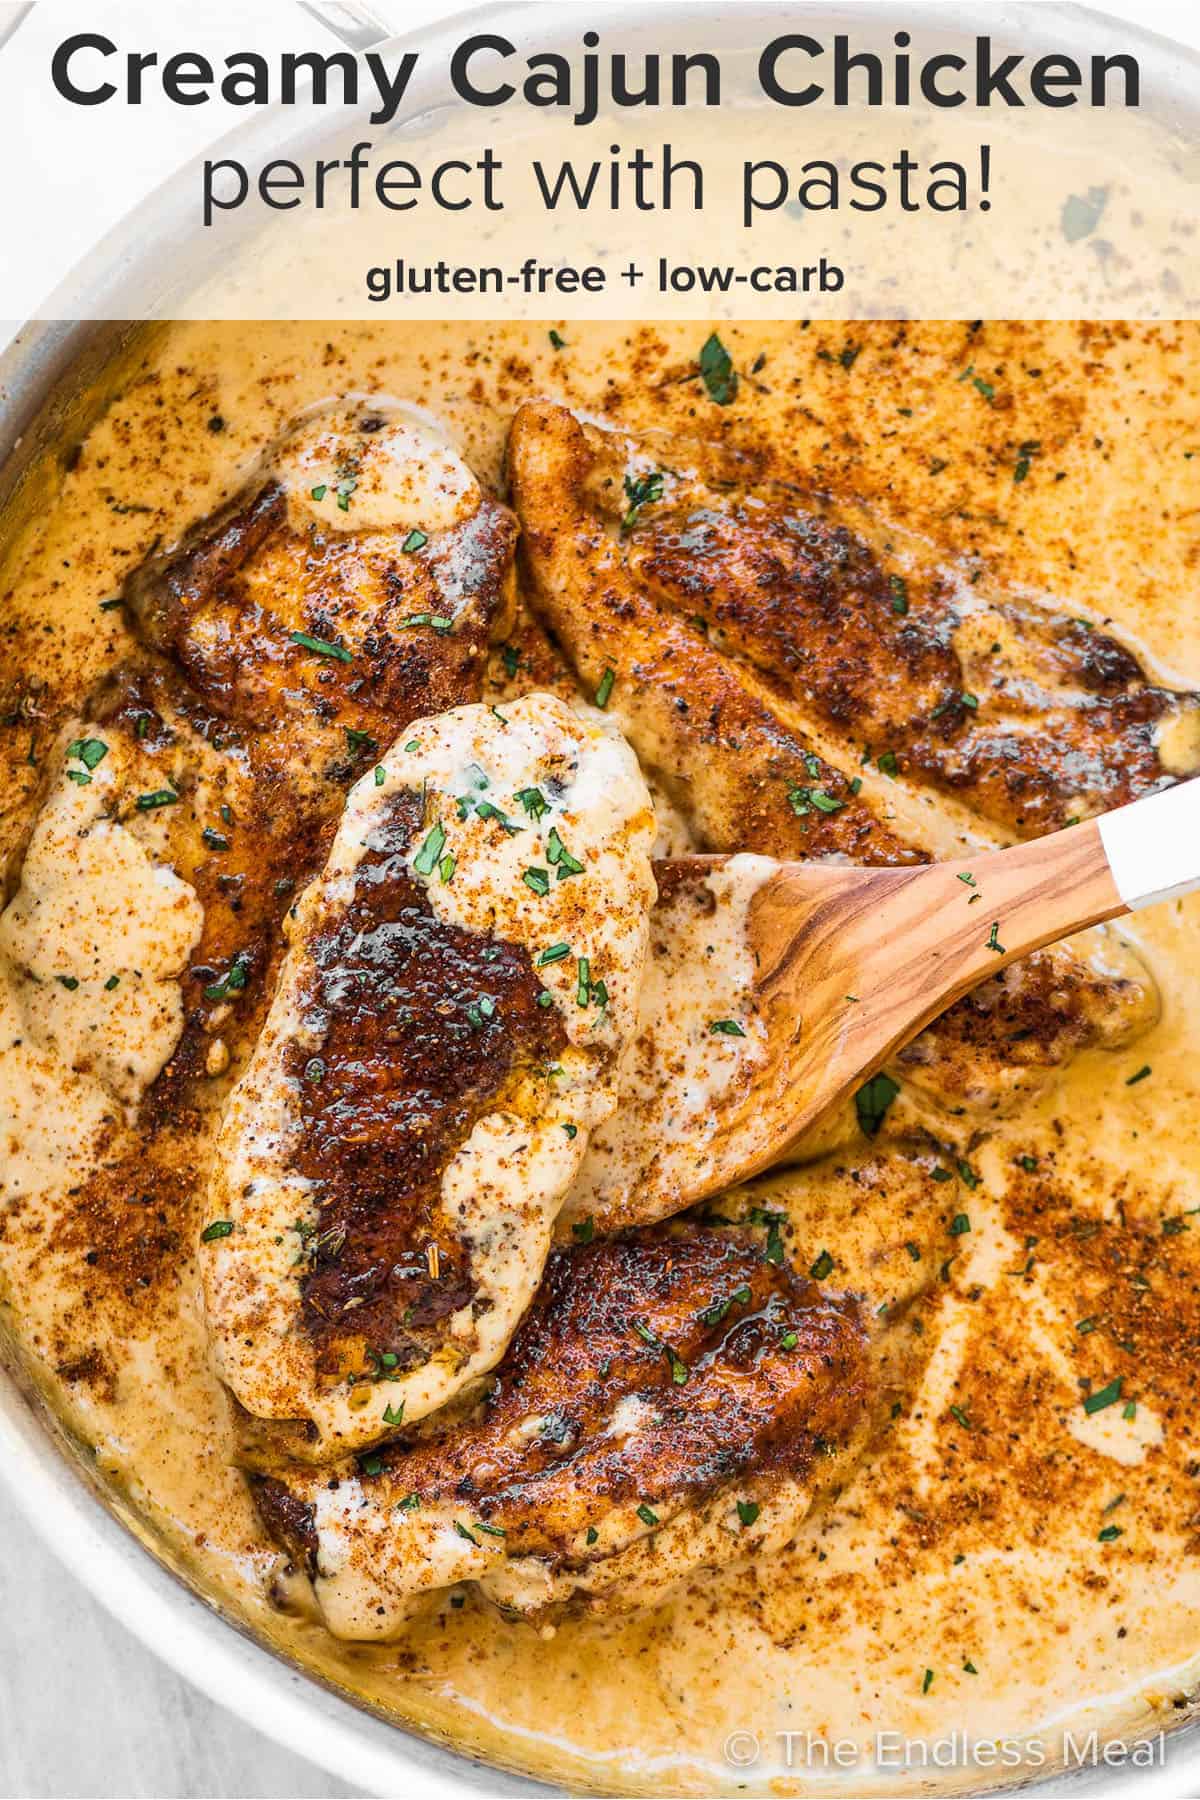 Creamy Cajun Chicken in a pan with a wooden spoon and the recipe title on top of the picture.